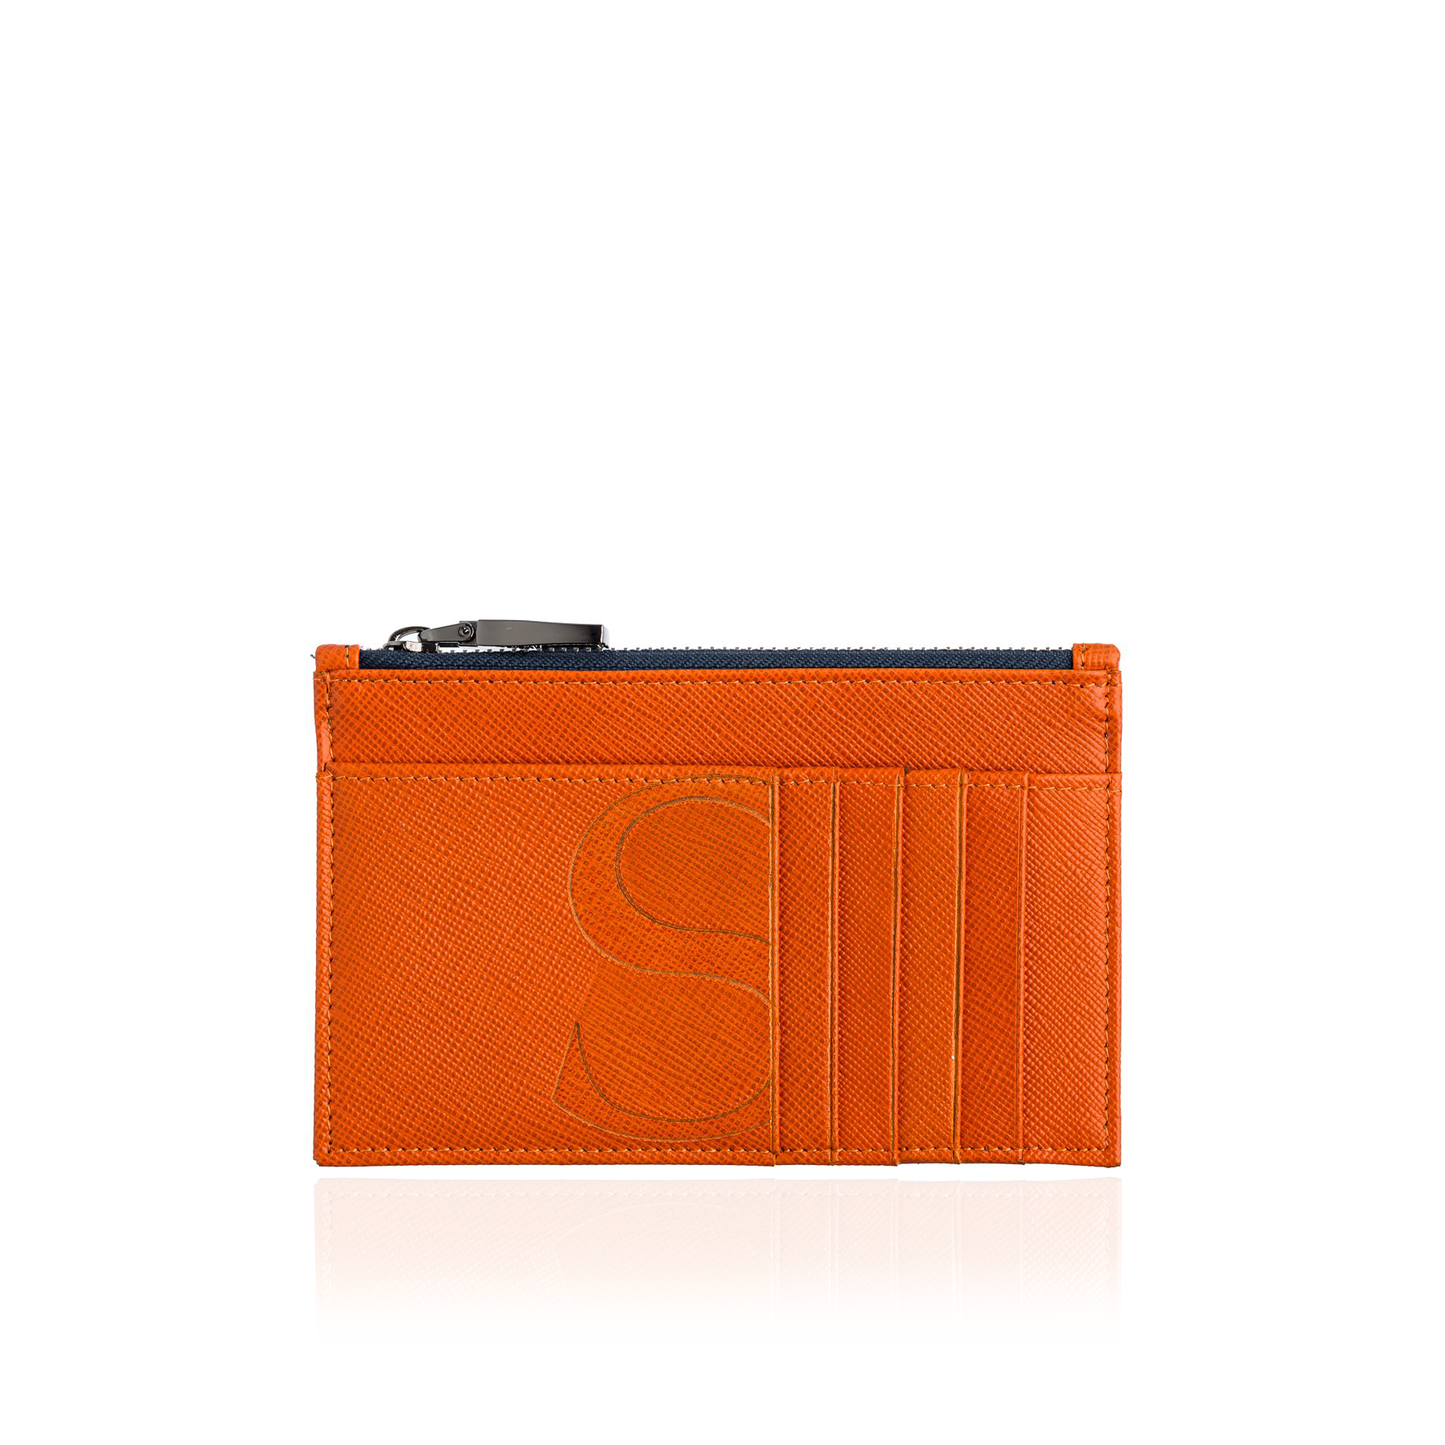 Credit Card Zip Pouch in Orange Textured Leather